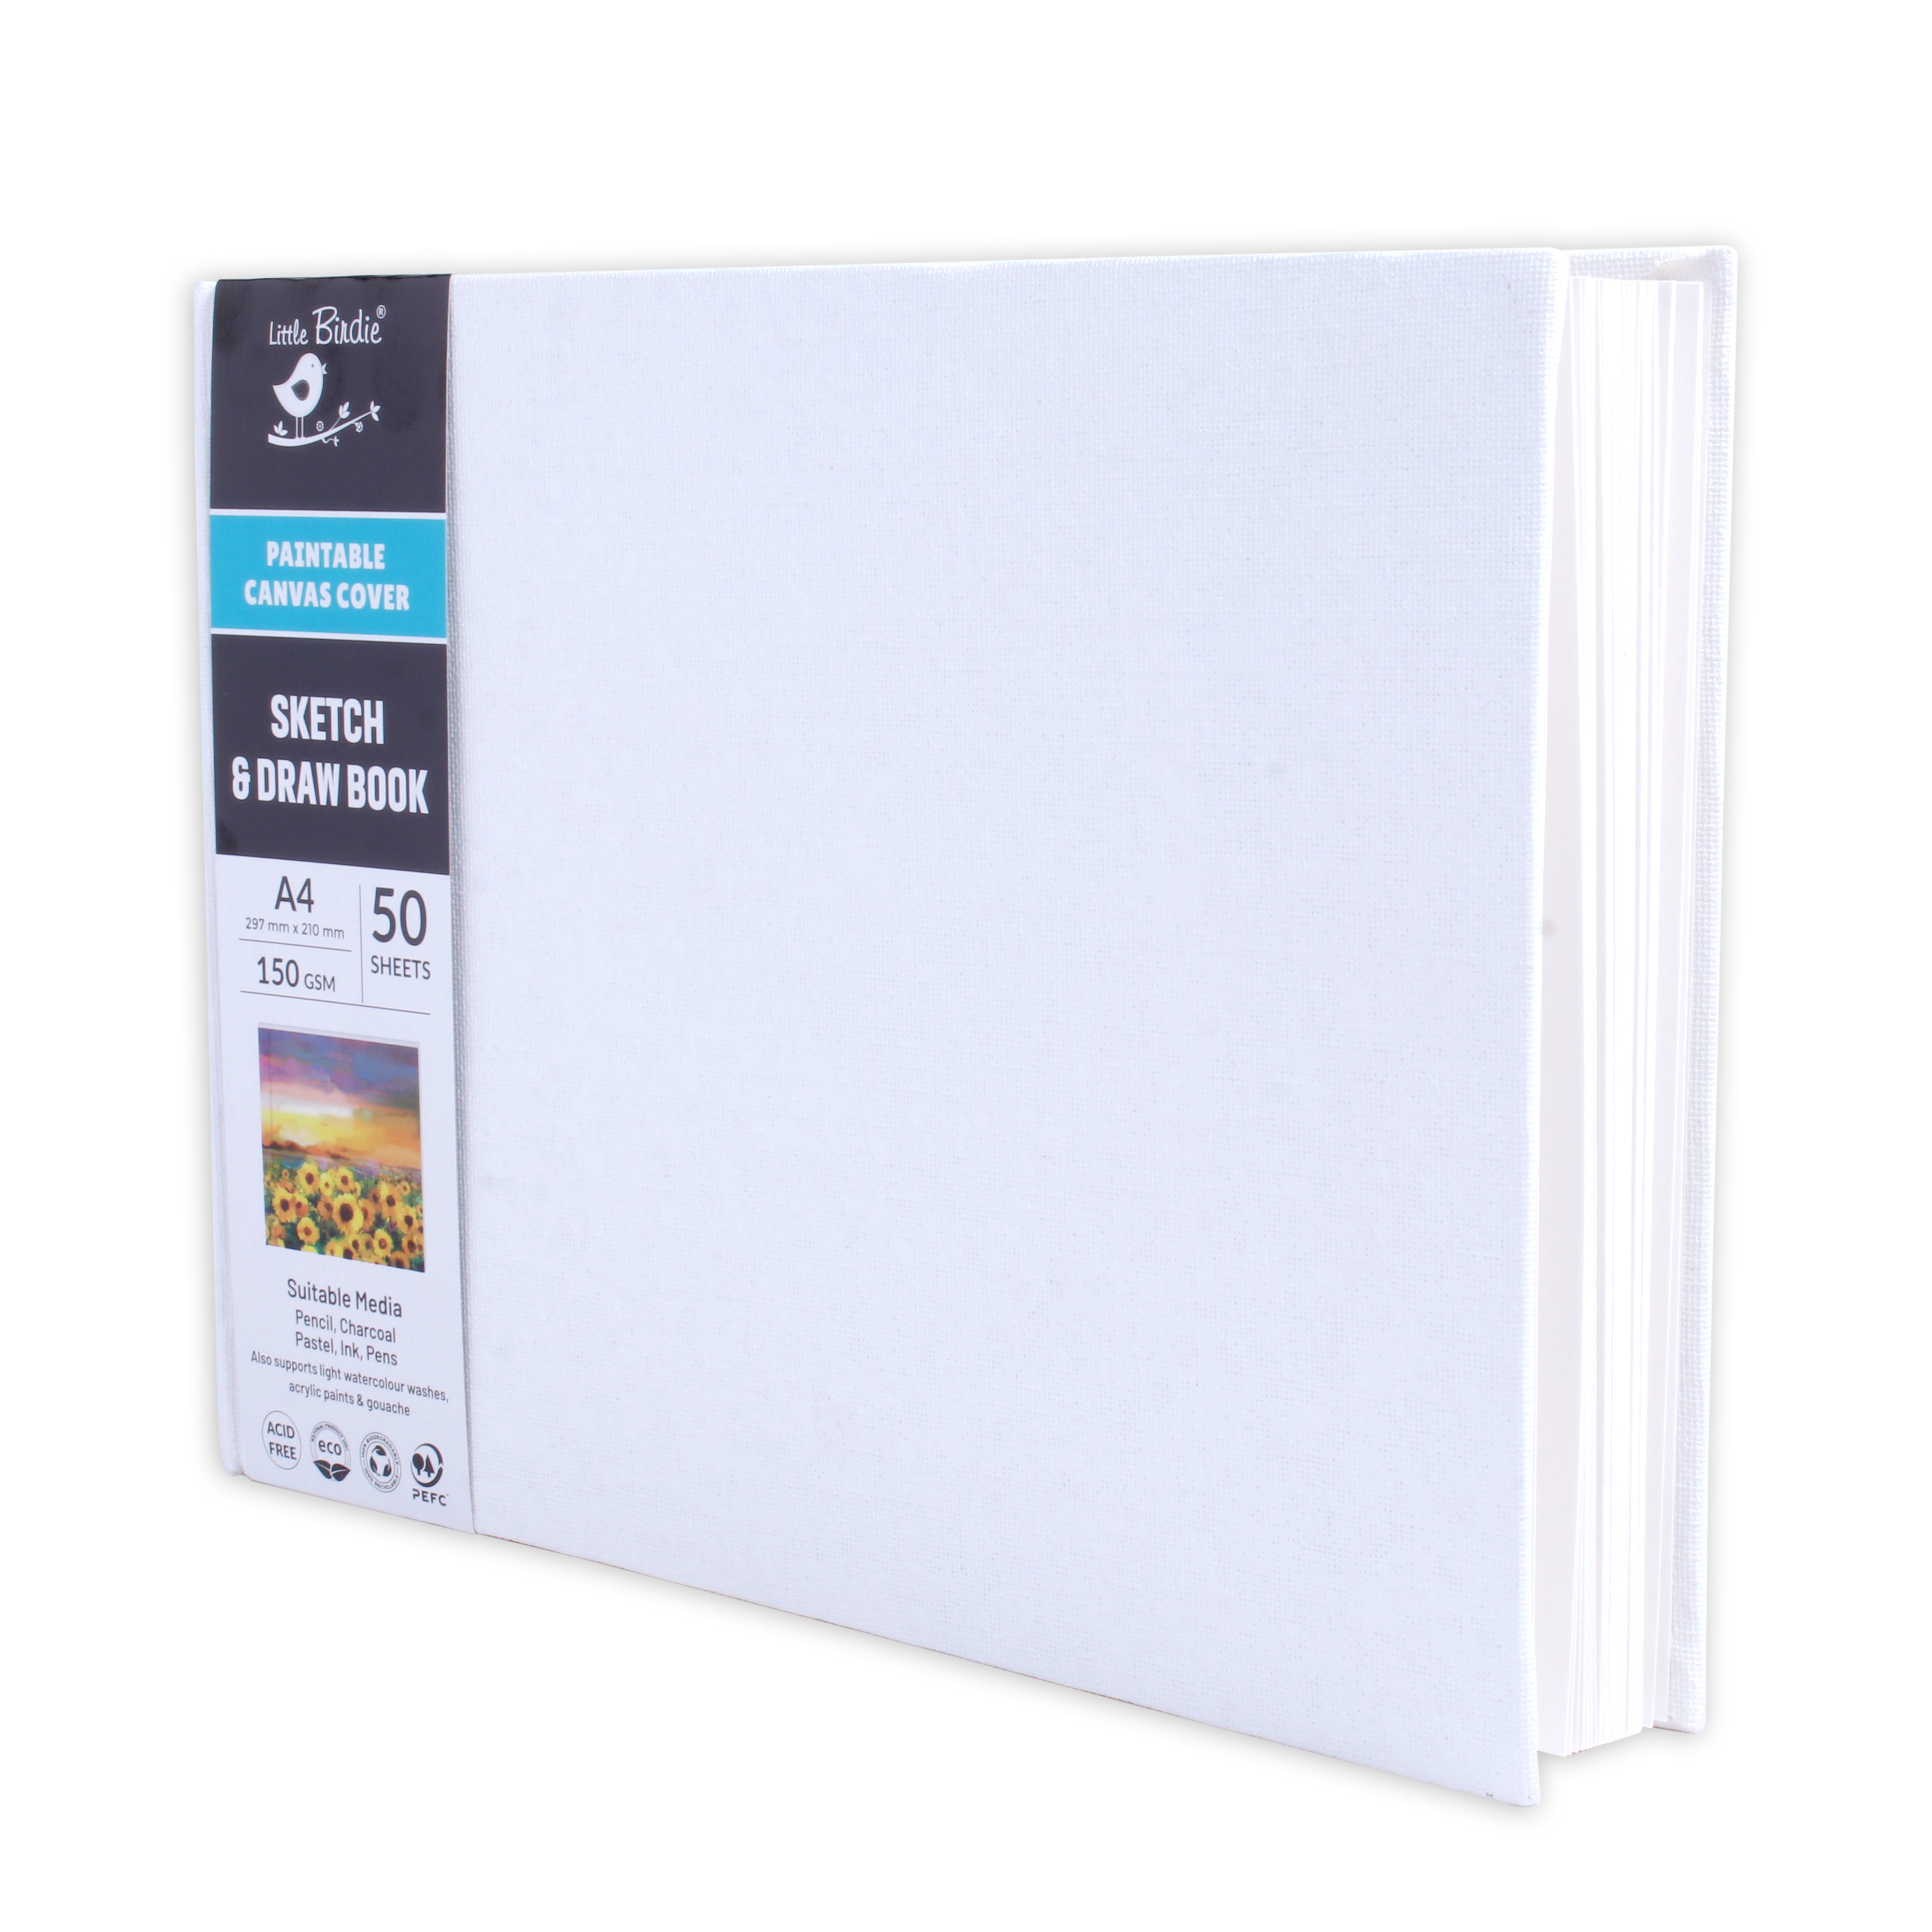 Paintable Canvas Hard Bound Sketch And Drawing Landscape A4 150gsm 50 Plain Sheets